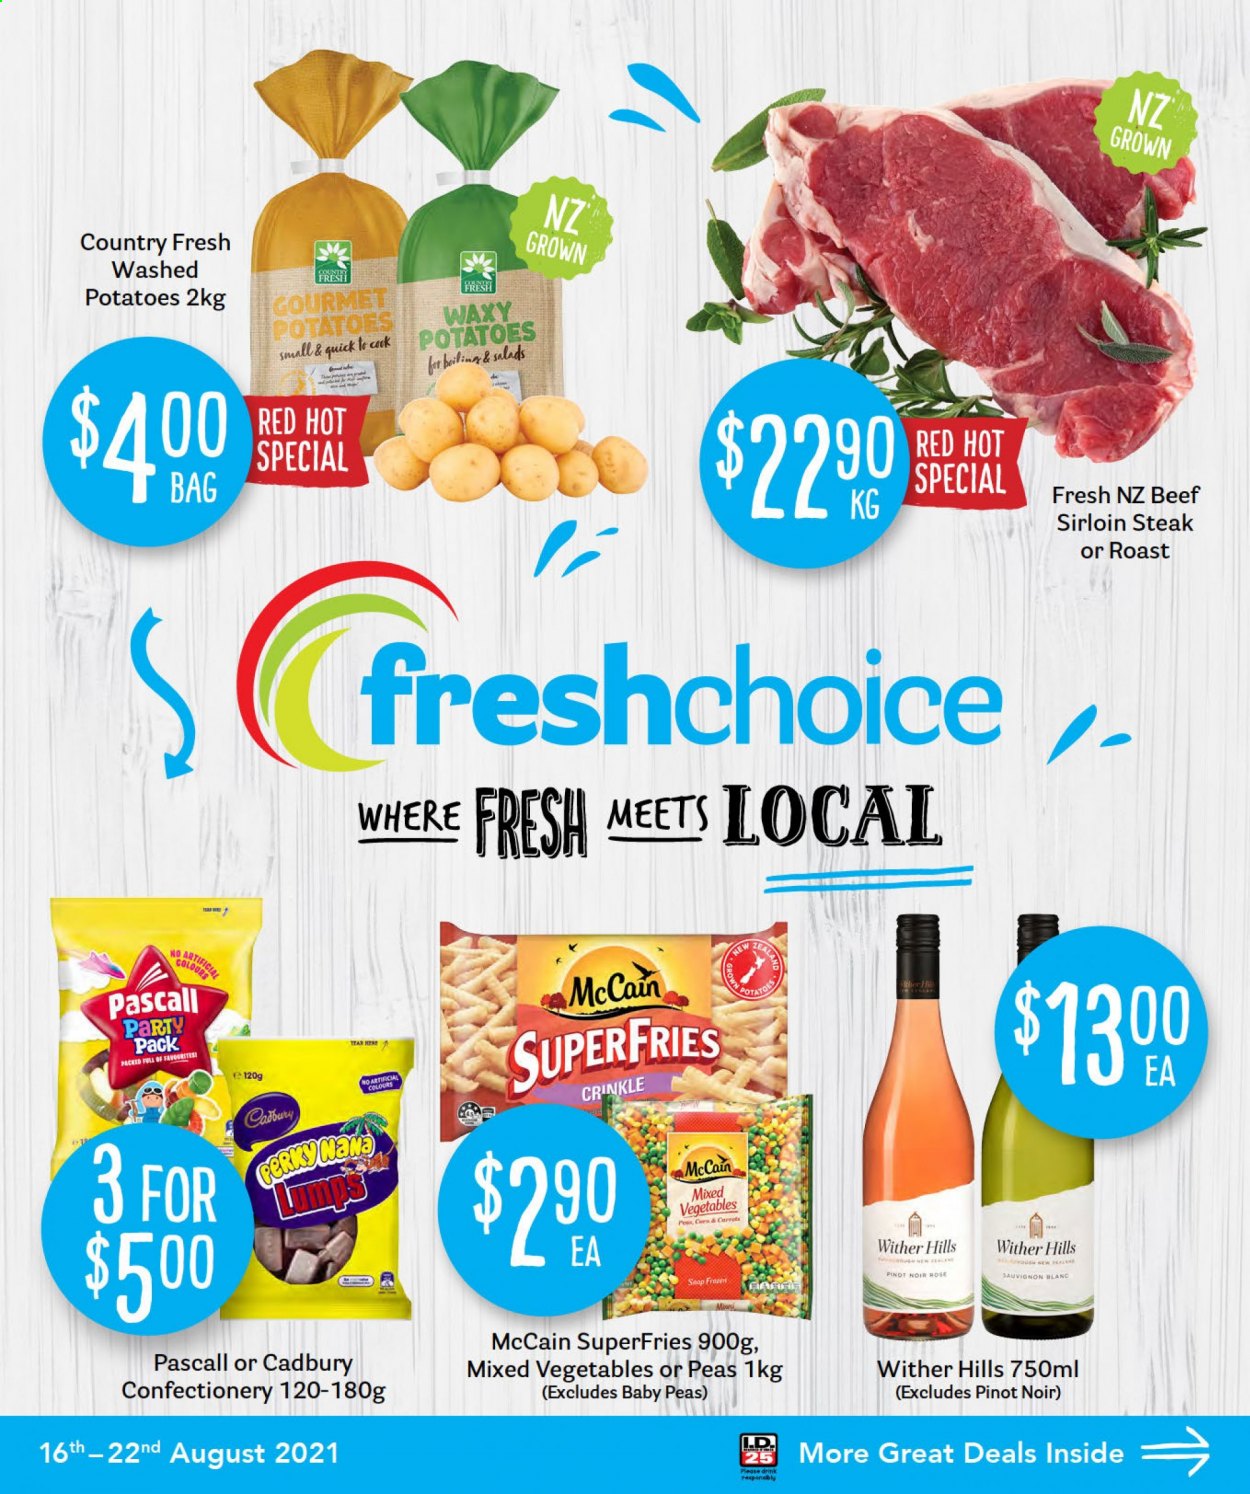 thumbnail - Fresh Choice mailer - 16.08.2021 - 22.08.2021 - Sales products - carrots, peas, mixed vegetables, McCain, potato fries, Cadbury, red wine, white wine, wine, Pinot Noir, Wither Hills, Sauvignon Blanc, rosé wine, beef meat, beef sirloin, steak, sirloin steak, rose. Page 1.